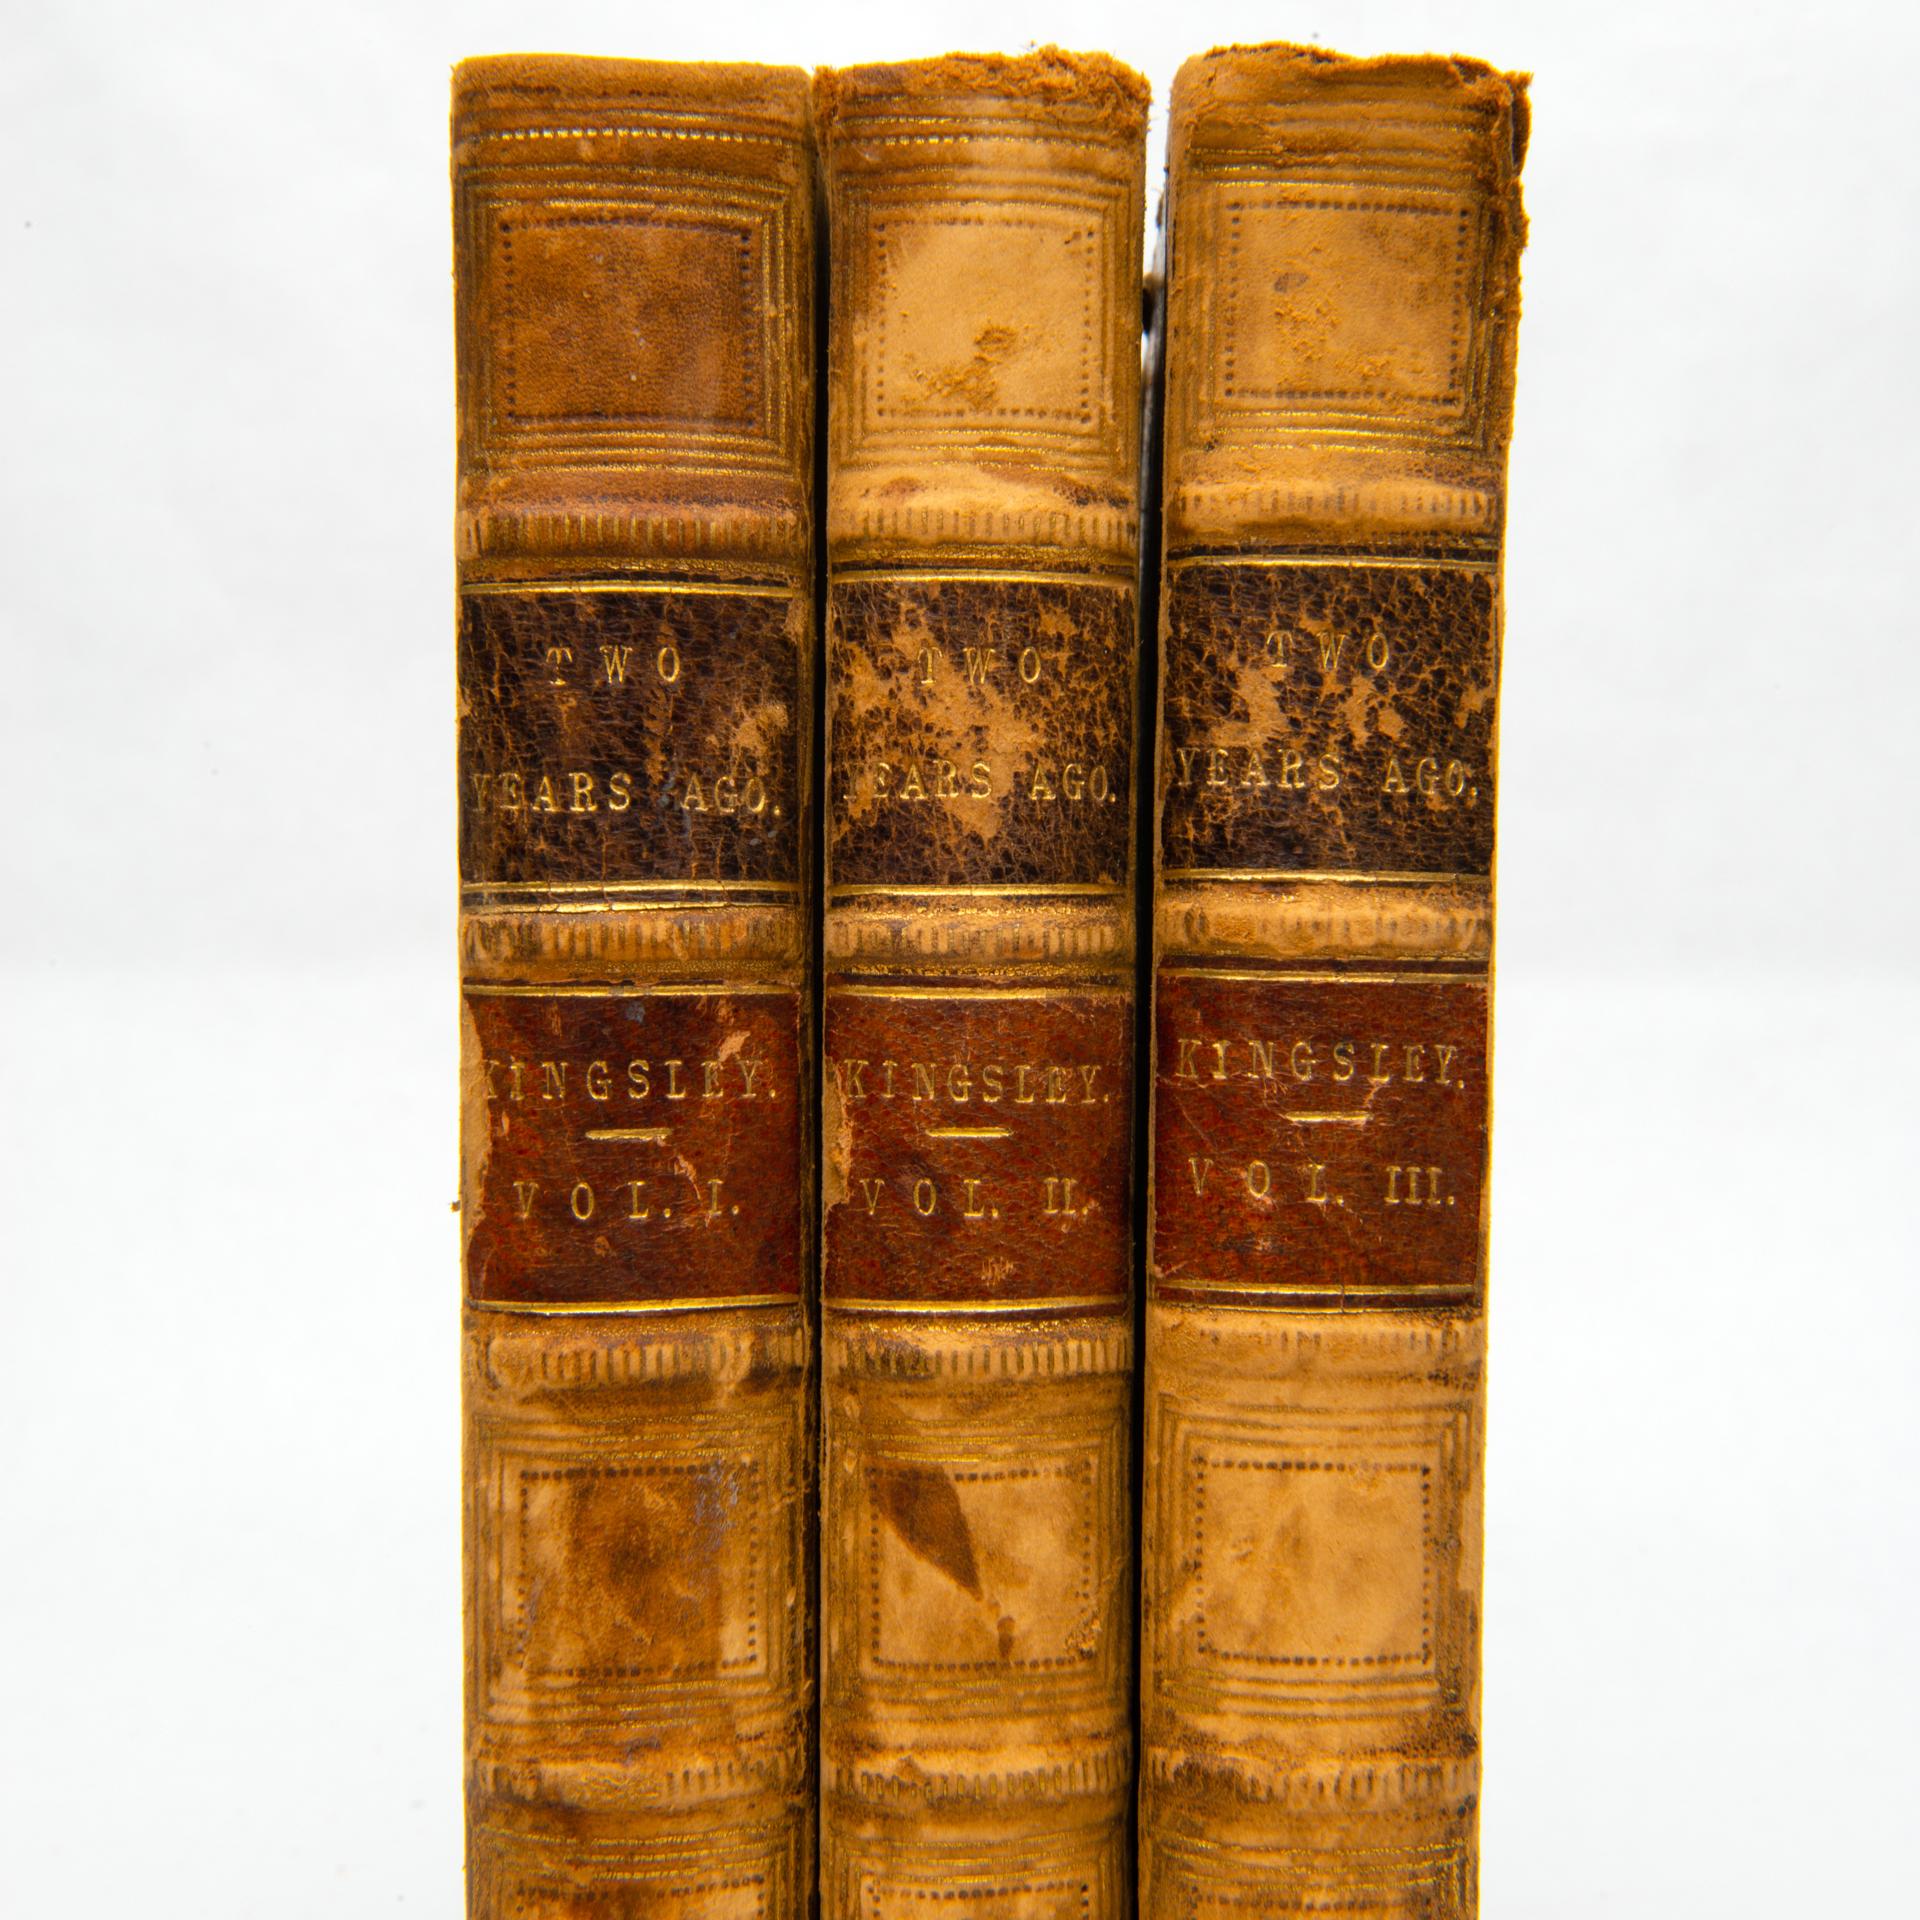 Other Three Antiques English Volumes For Sale